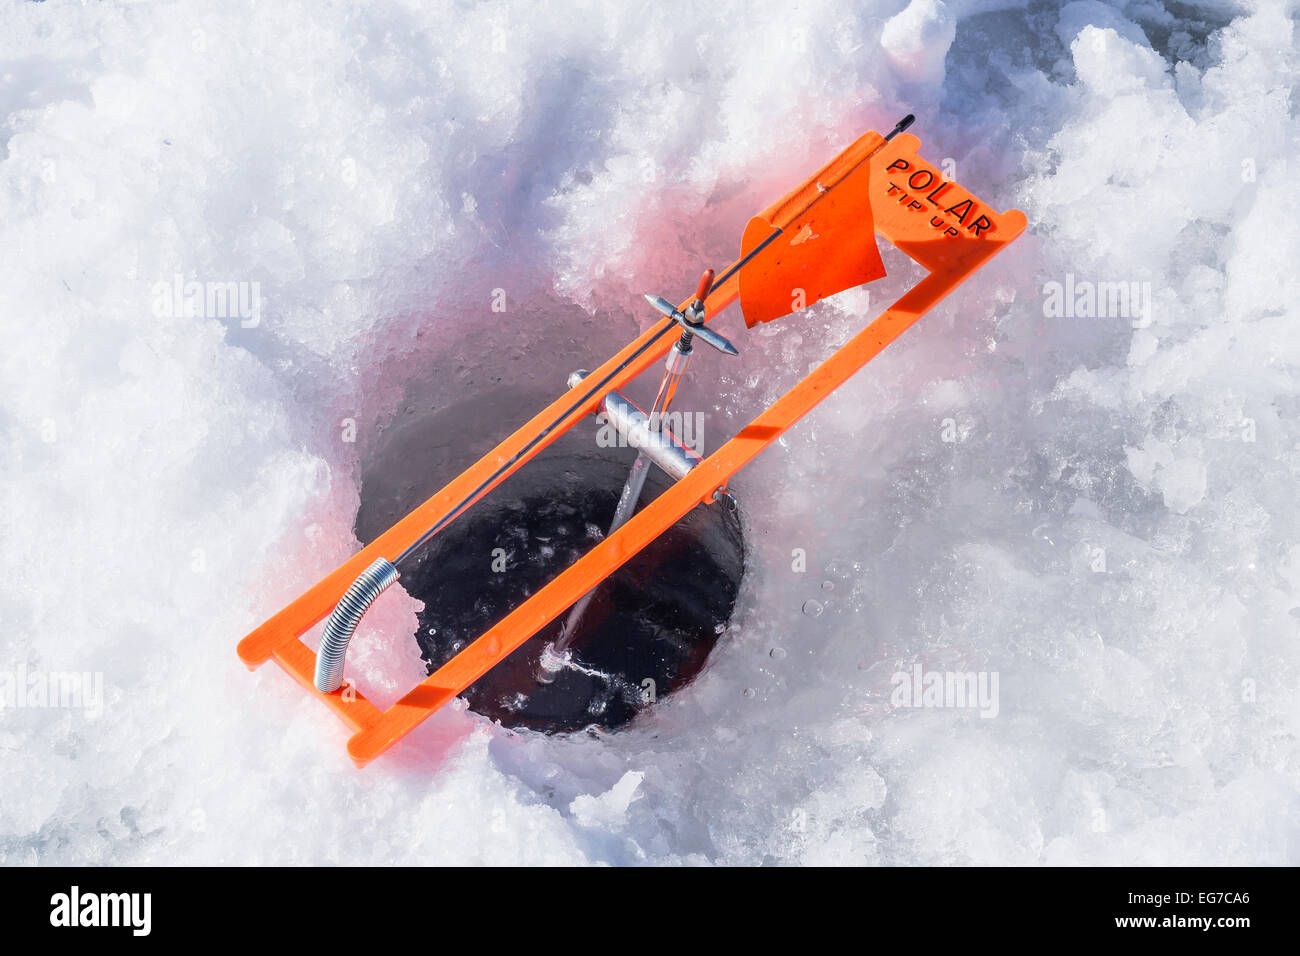 https://c8.alamy.com/comp/EG7CA6/tip-up-with-flag-while-ice-fishing-for-northern-pike-on-a-lake-in-EG7CA6.jpg